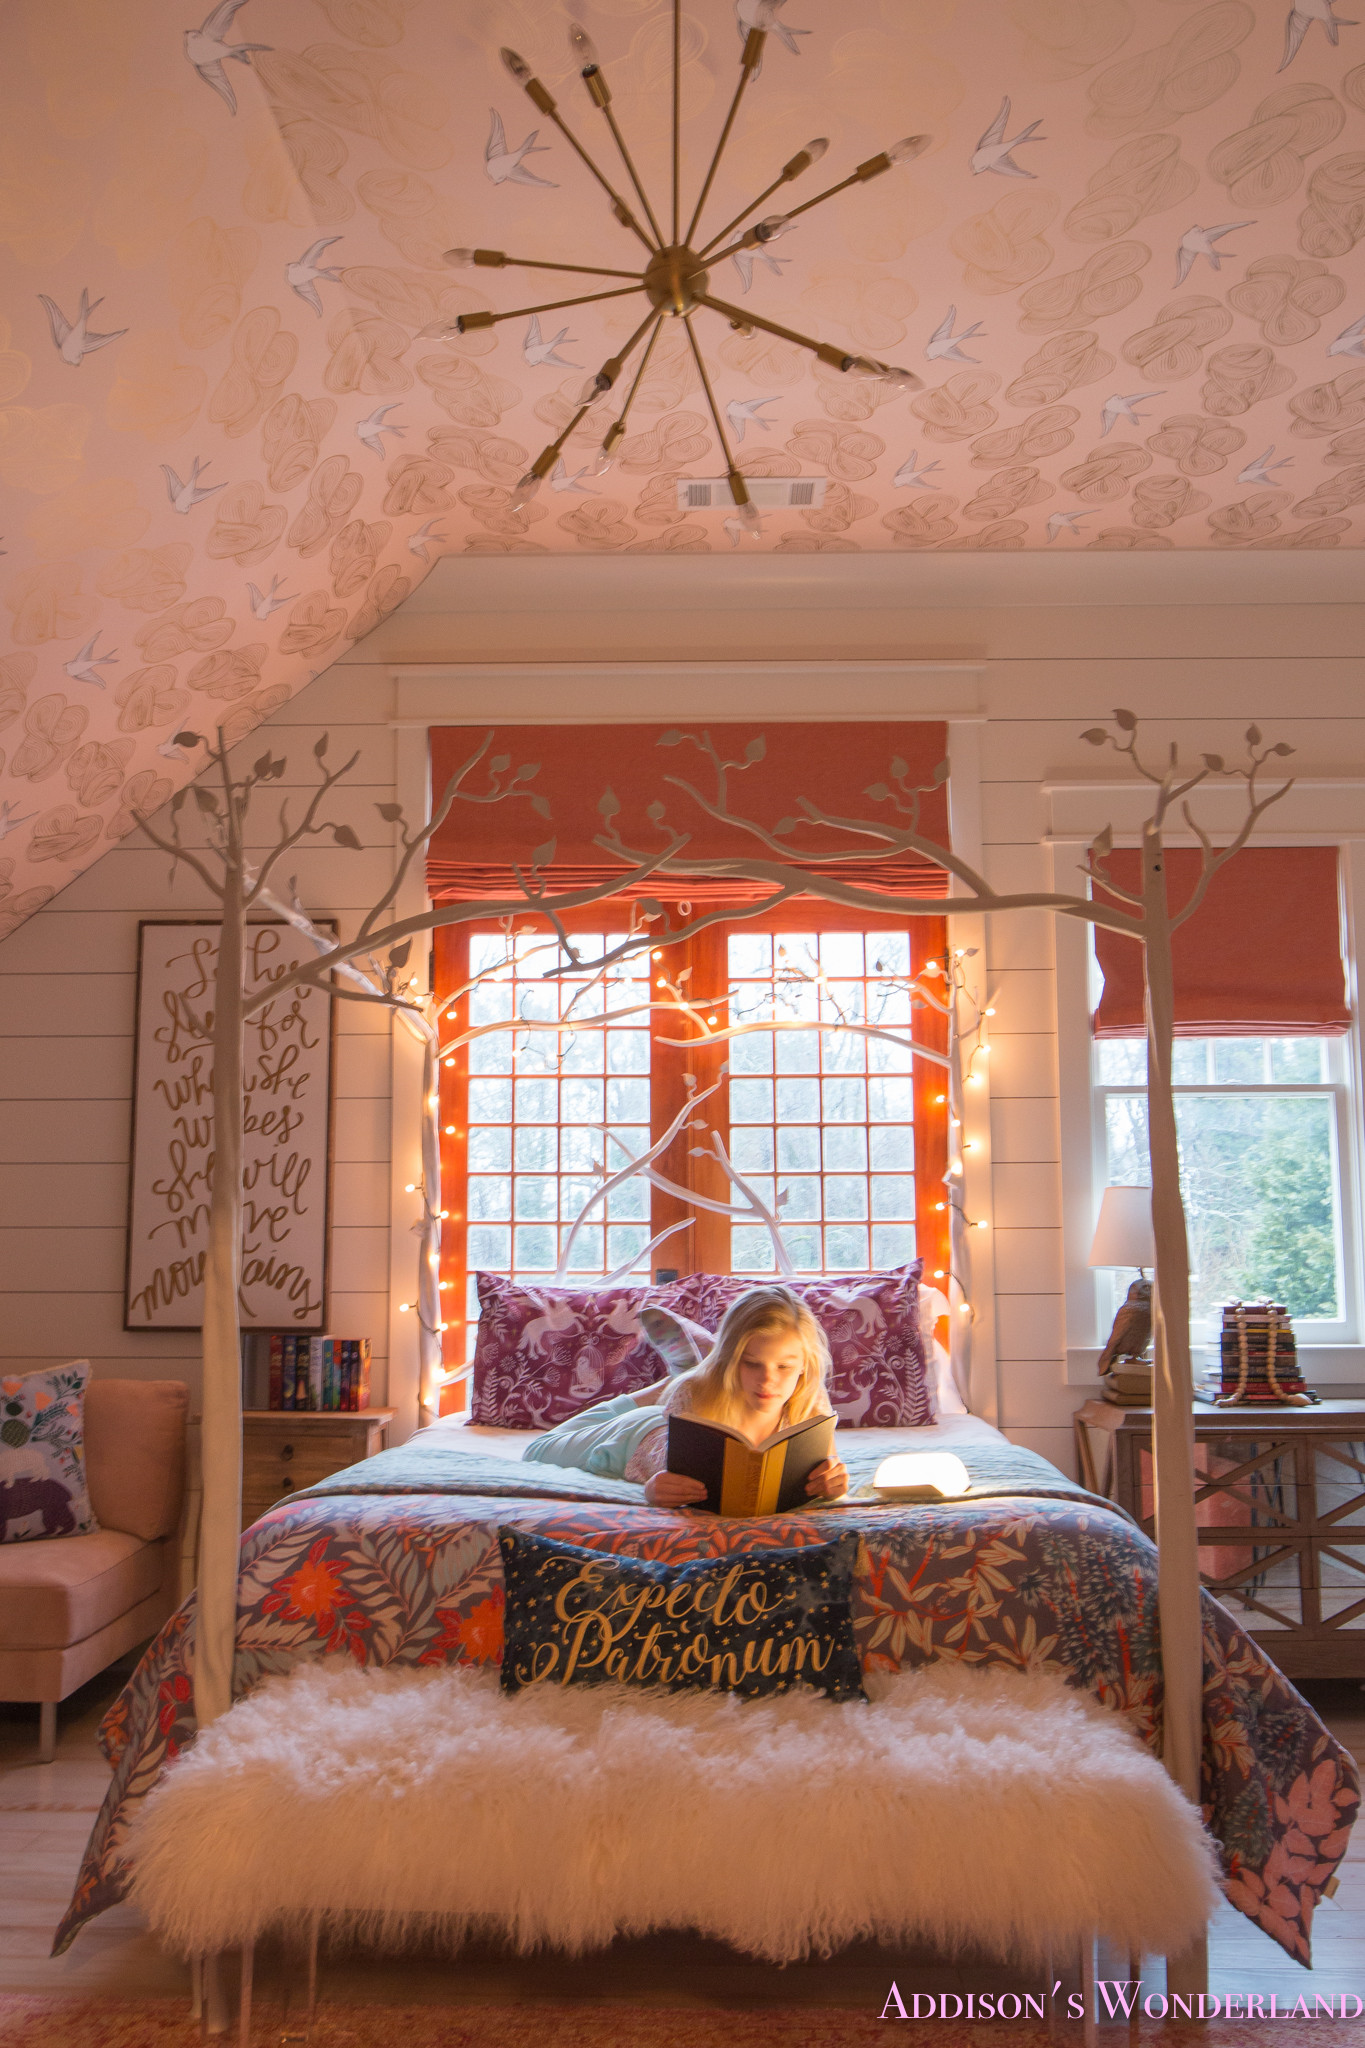 Harry Potter Bedroom Wallpaper
 Creating a Beautiful Harry Potter Themed Bedroom for